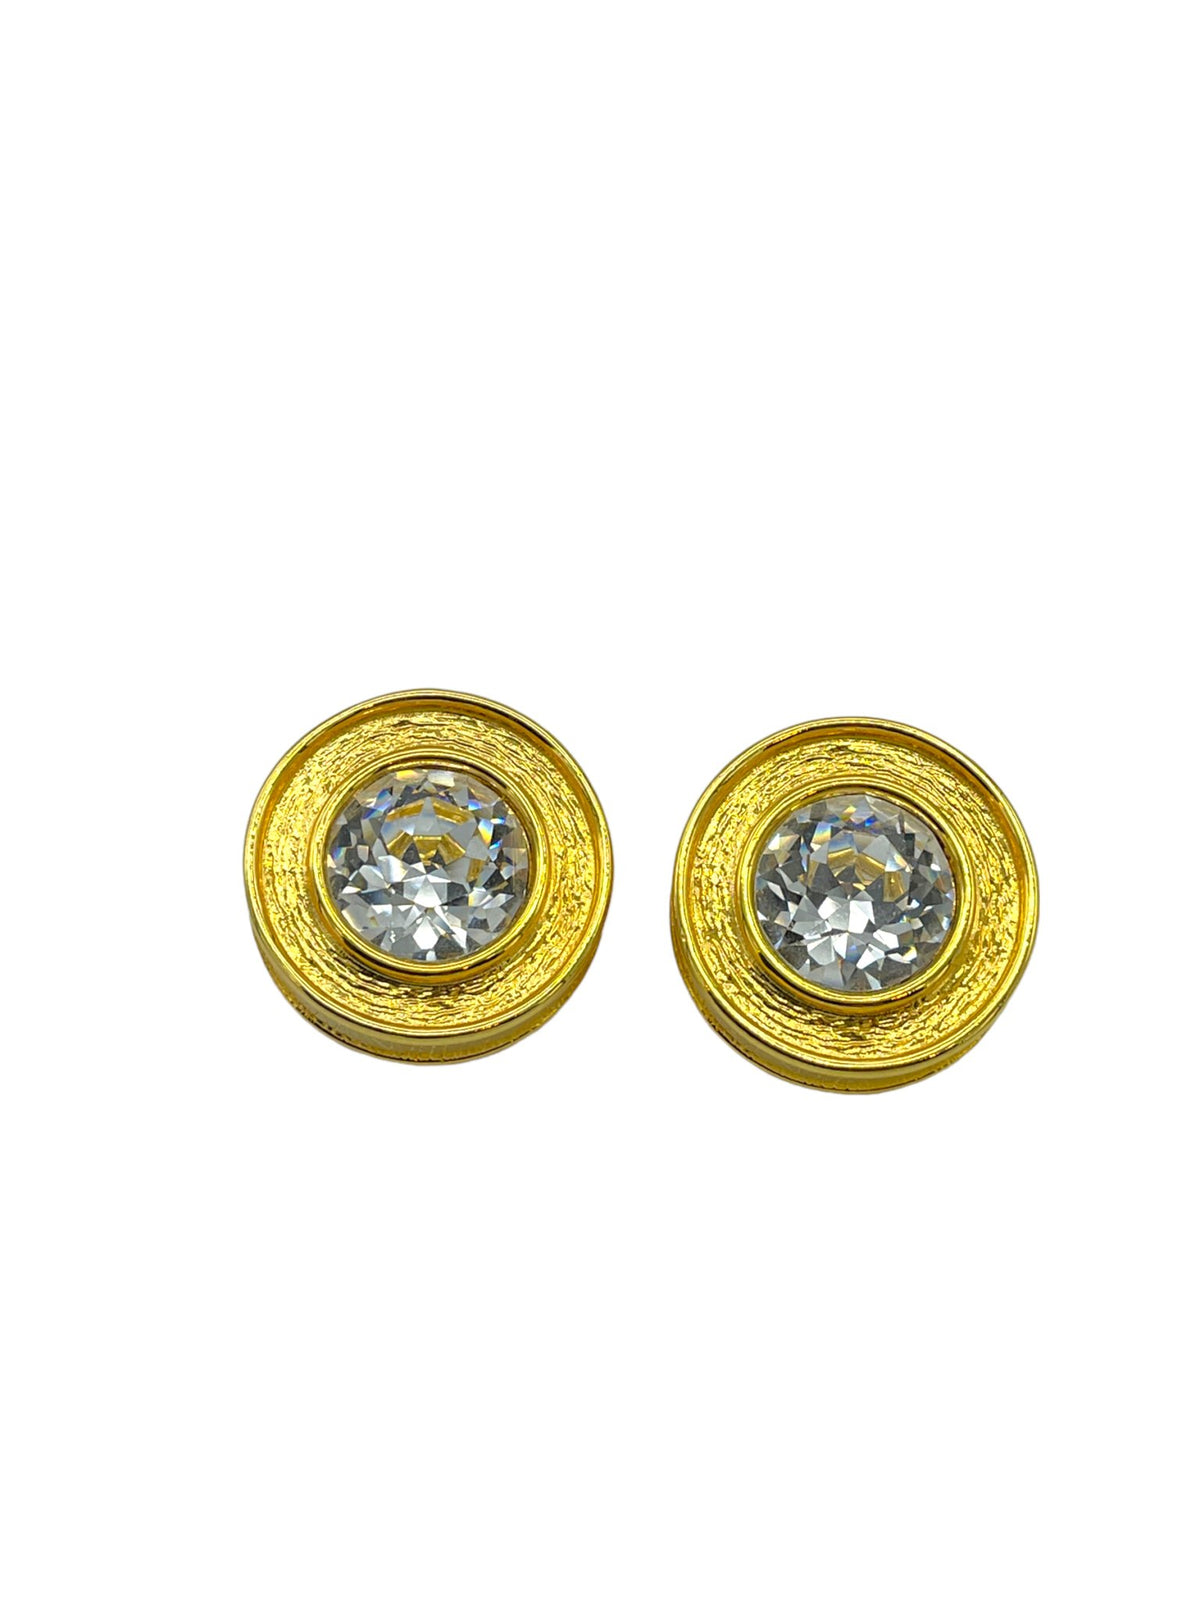 Kenneth Jay Lane KJL Gold Round Large Clear Crystal Rhinestone Vintage Clip-On Earrings - 24 Wishes Vintage Jewelry